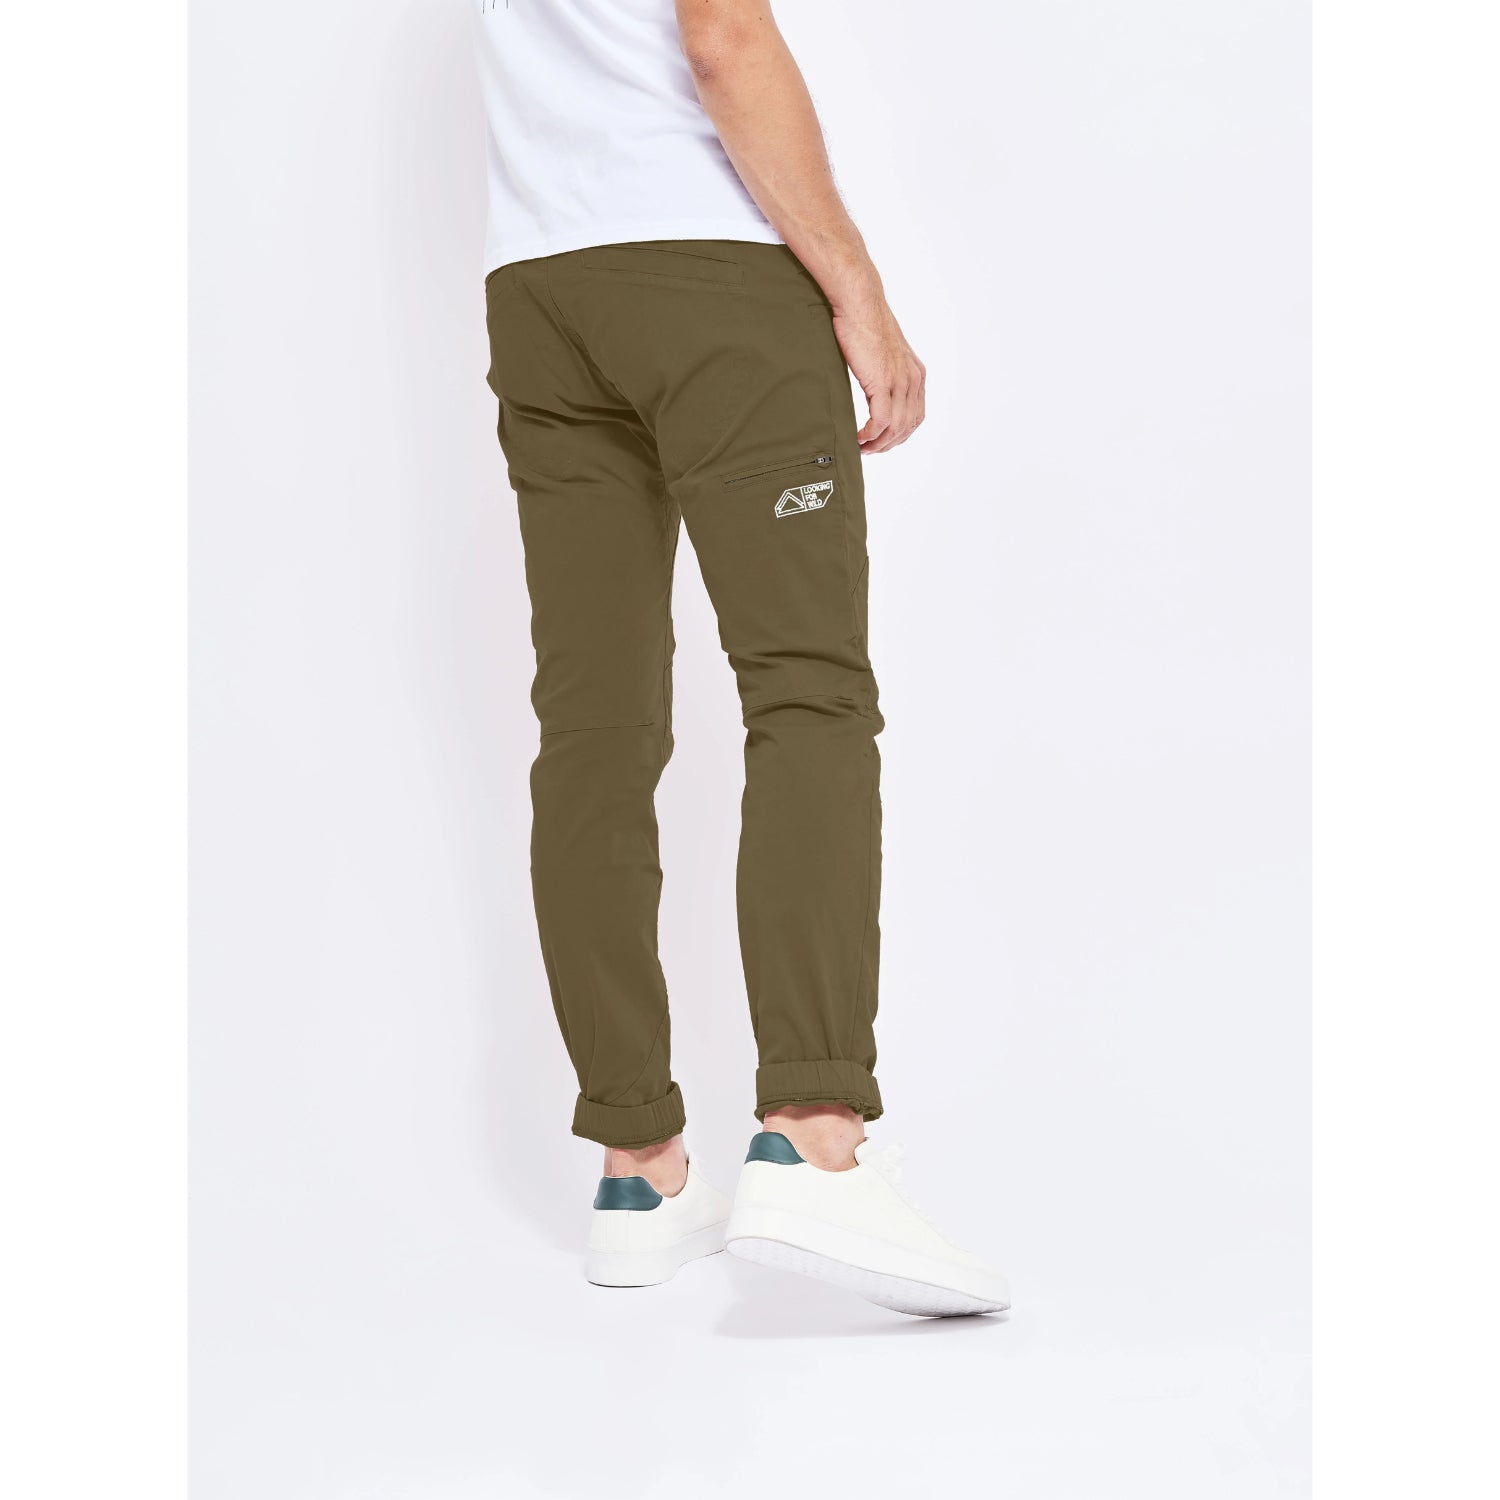 Looking For Wild Fitz Roy Pant - Mens (Olive)